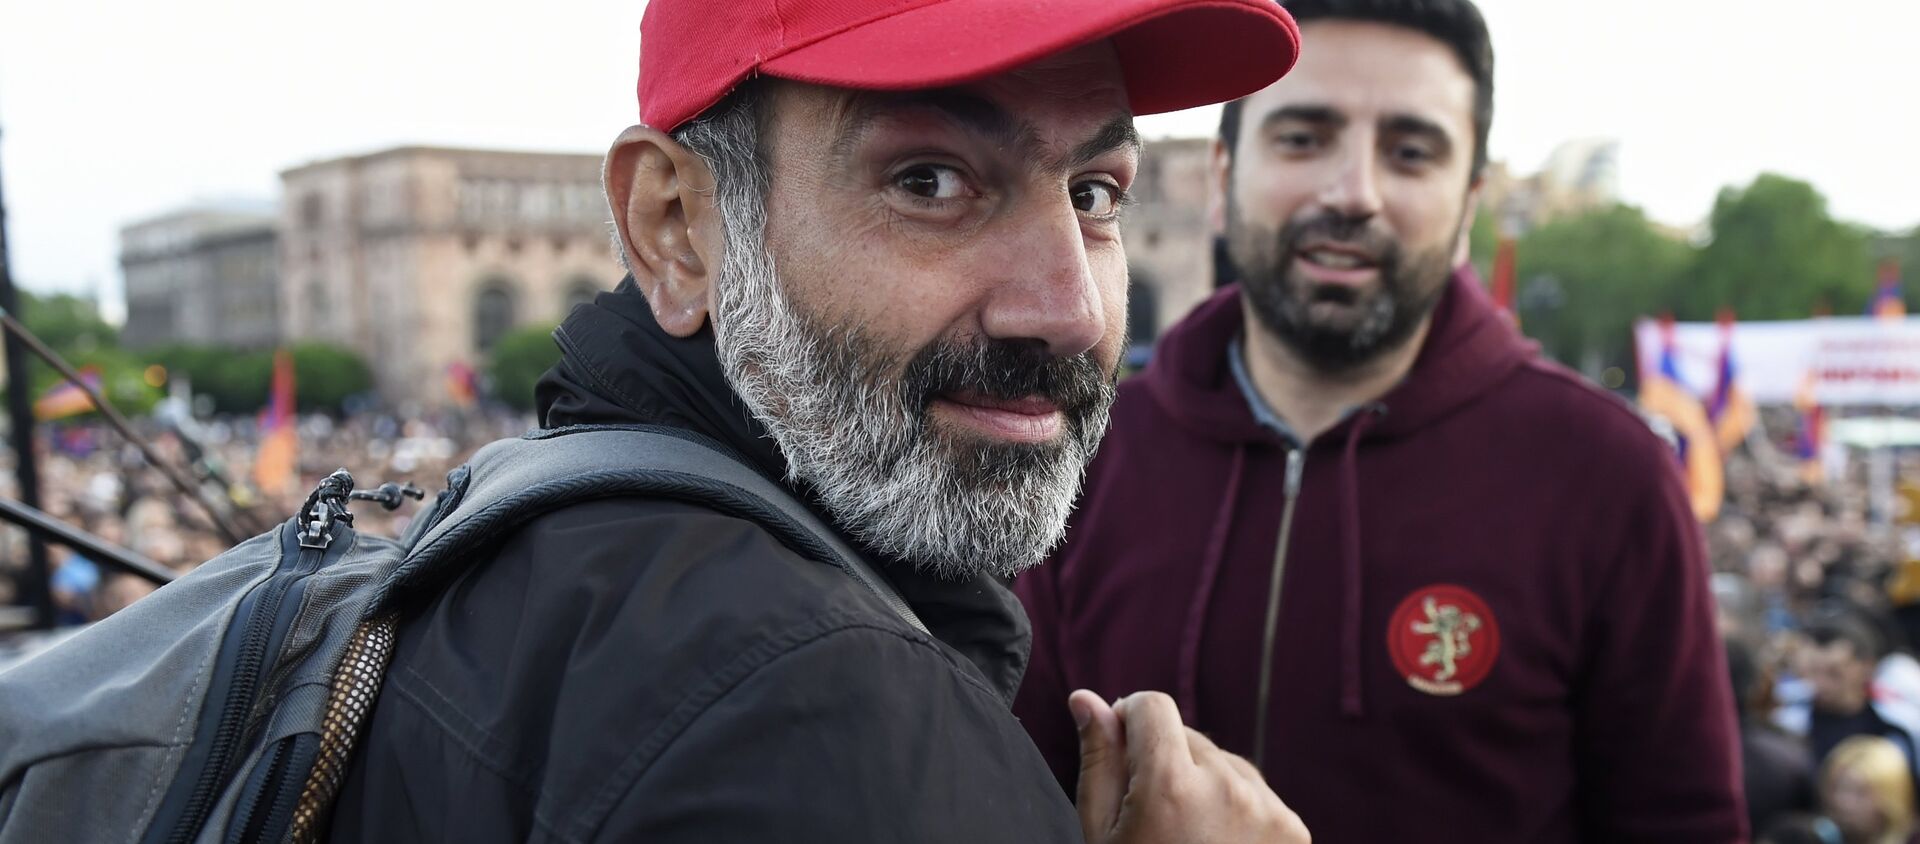 Leader of the My Step opposition movement Nikol Pashinyan, left, at a rally on Republic Square in Yerevan - Sputnik International, 1920, 25.12.2020